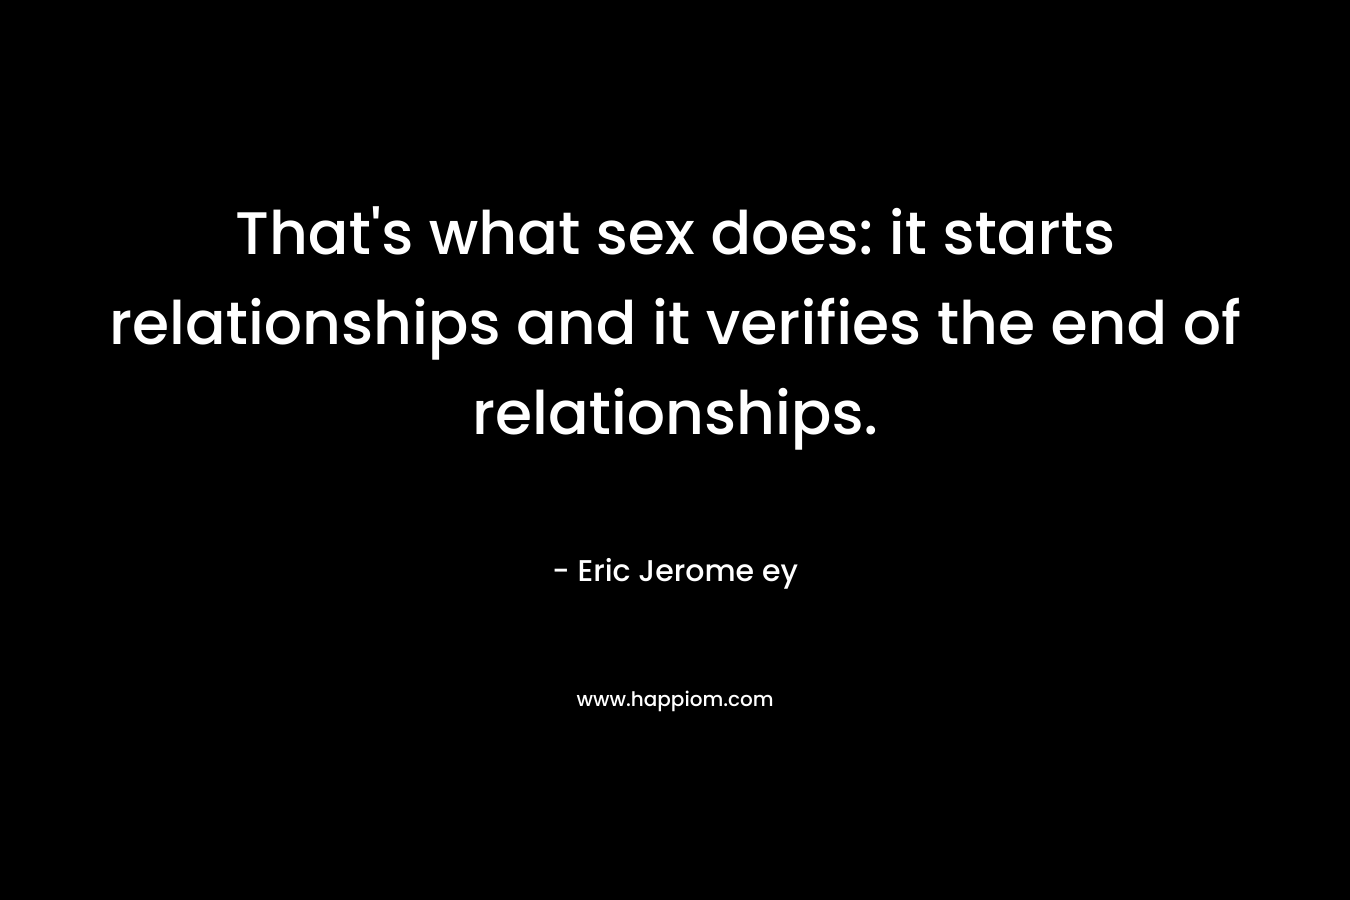 That's what sex does: it starts relationships and it verifies the end of relationships.